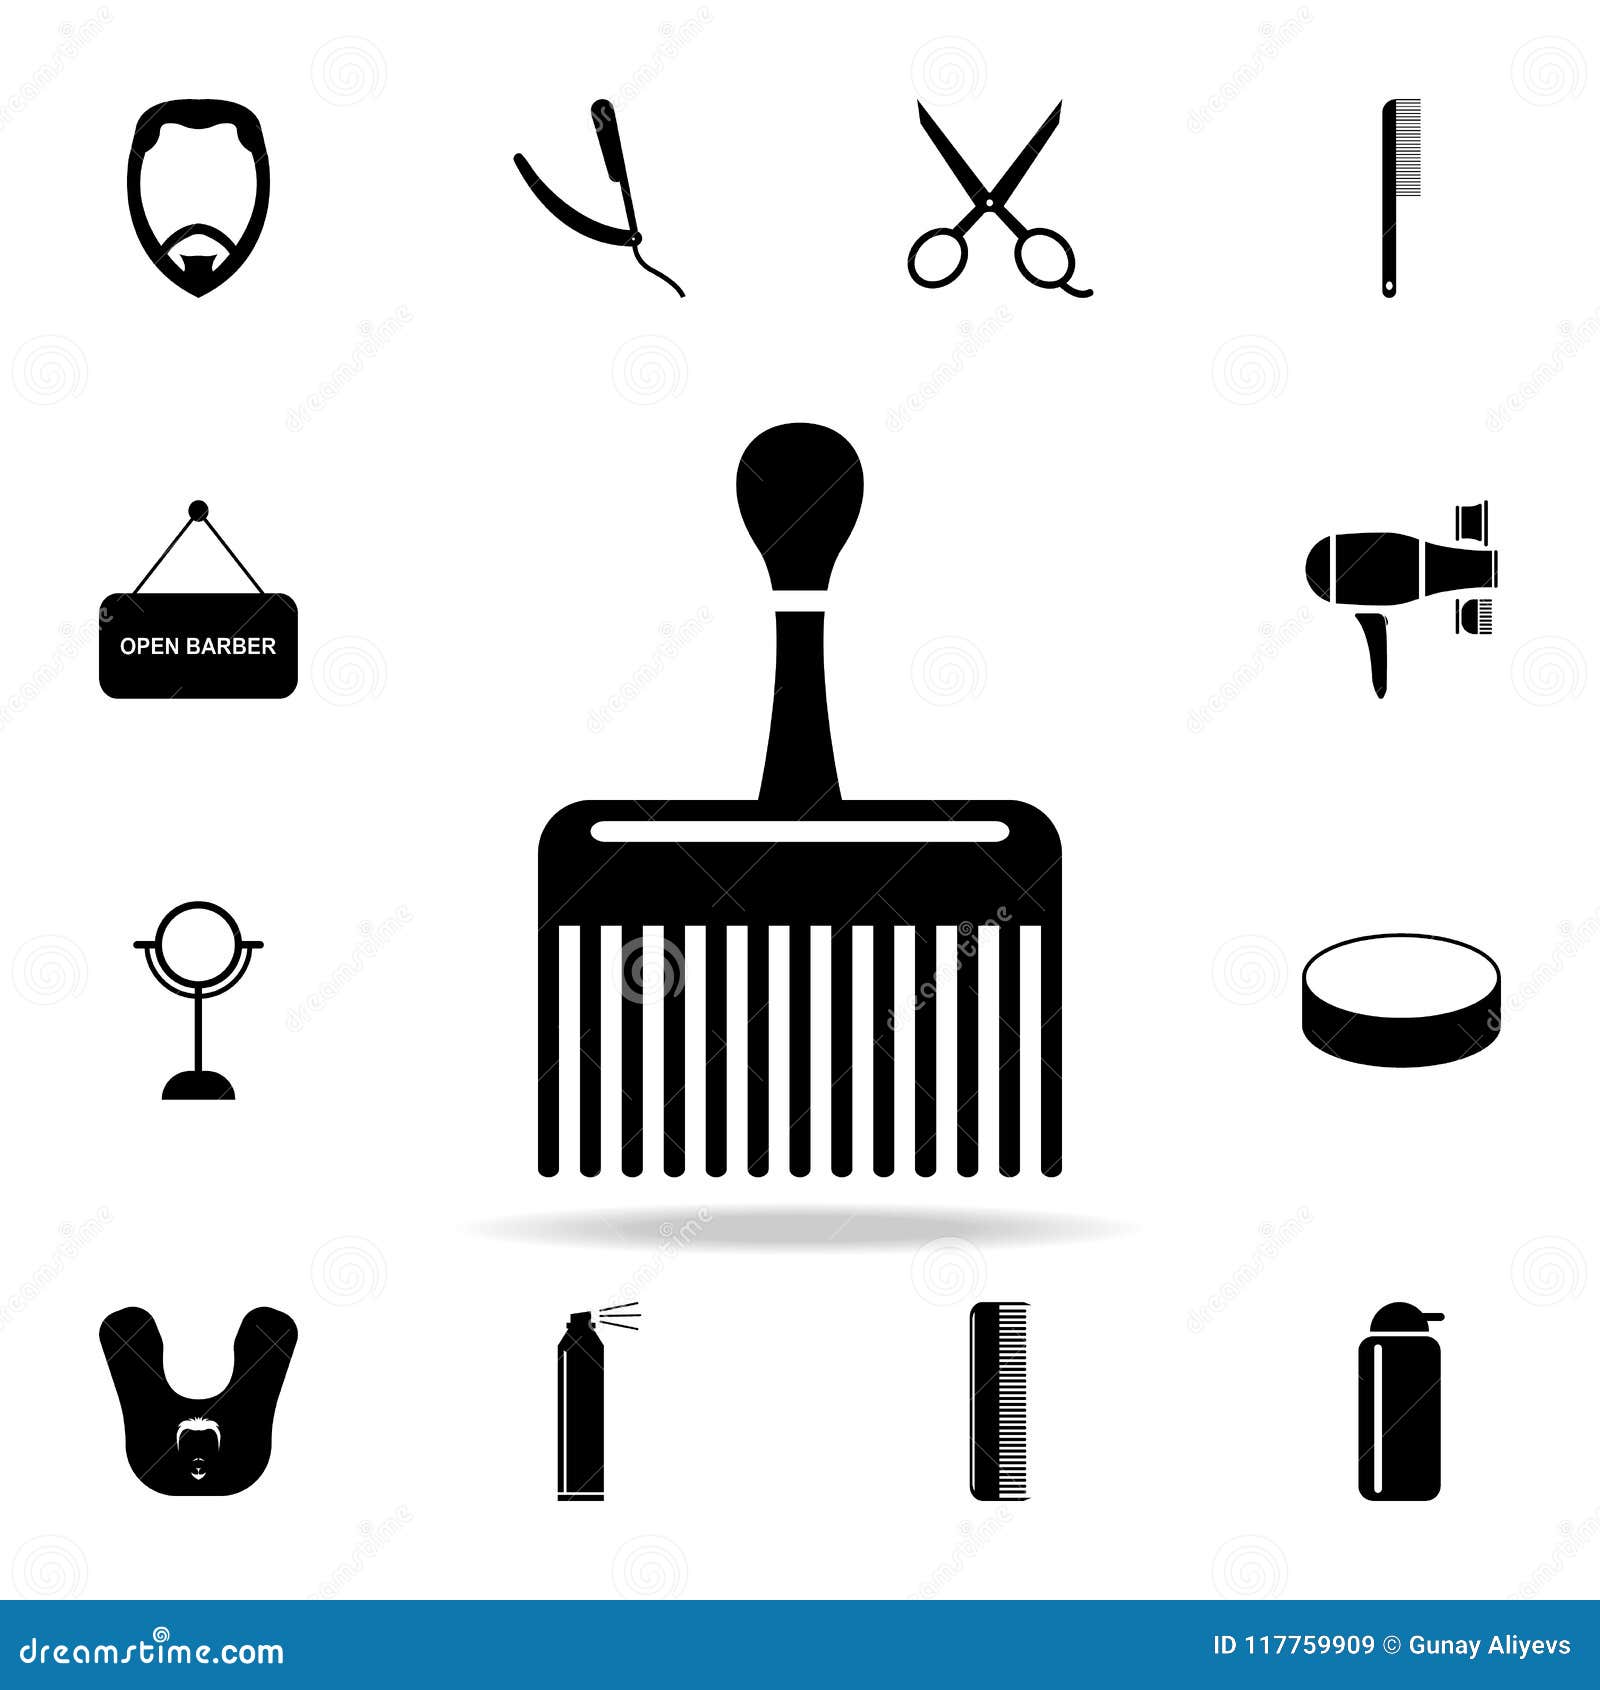 Premium Vector  A set of accessories and tools for a hairdressing salon  barbershop